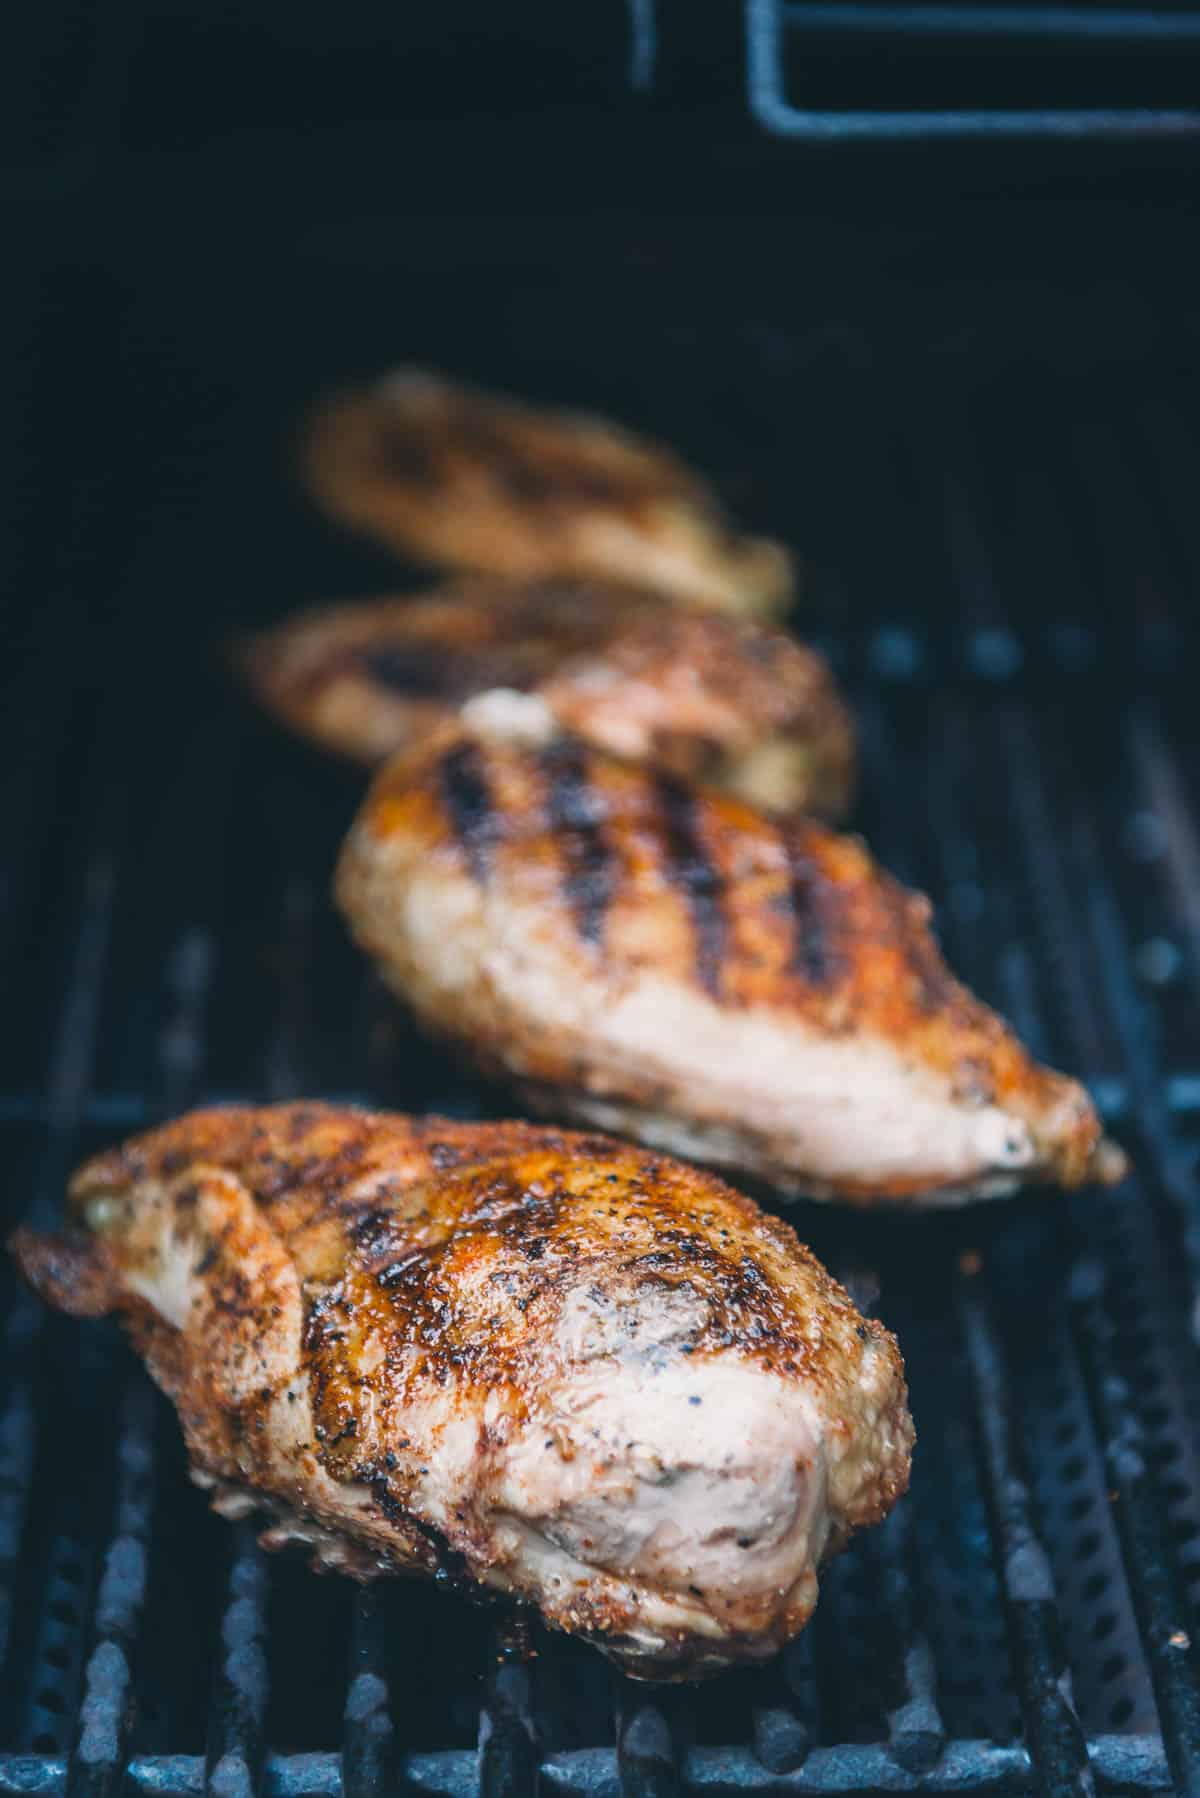 Chicken on the grill.